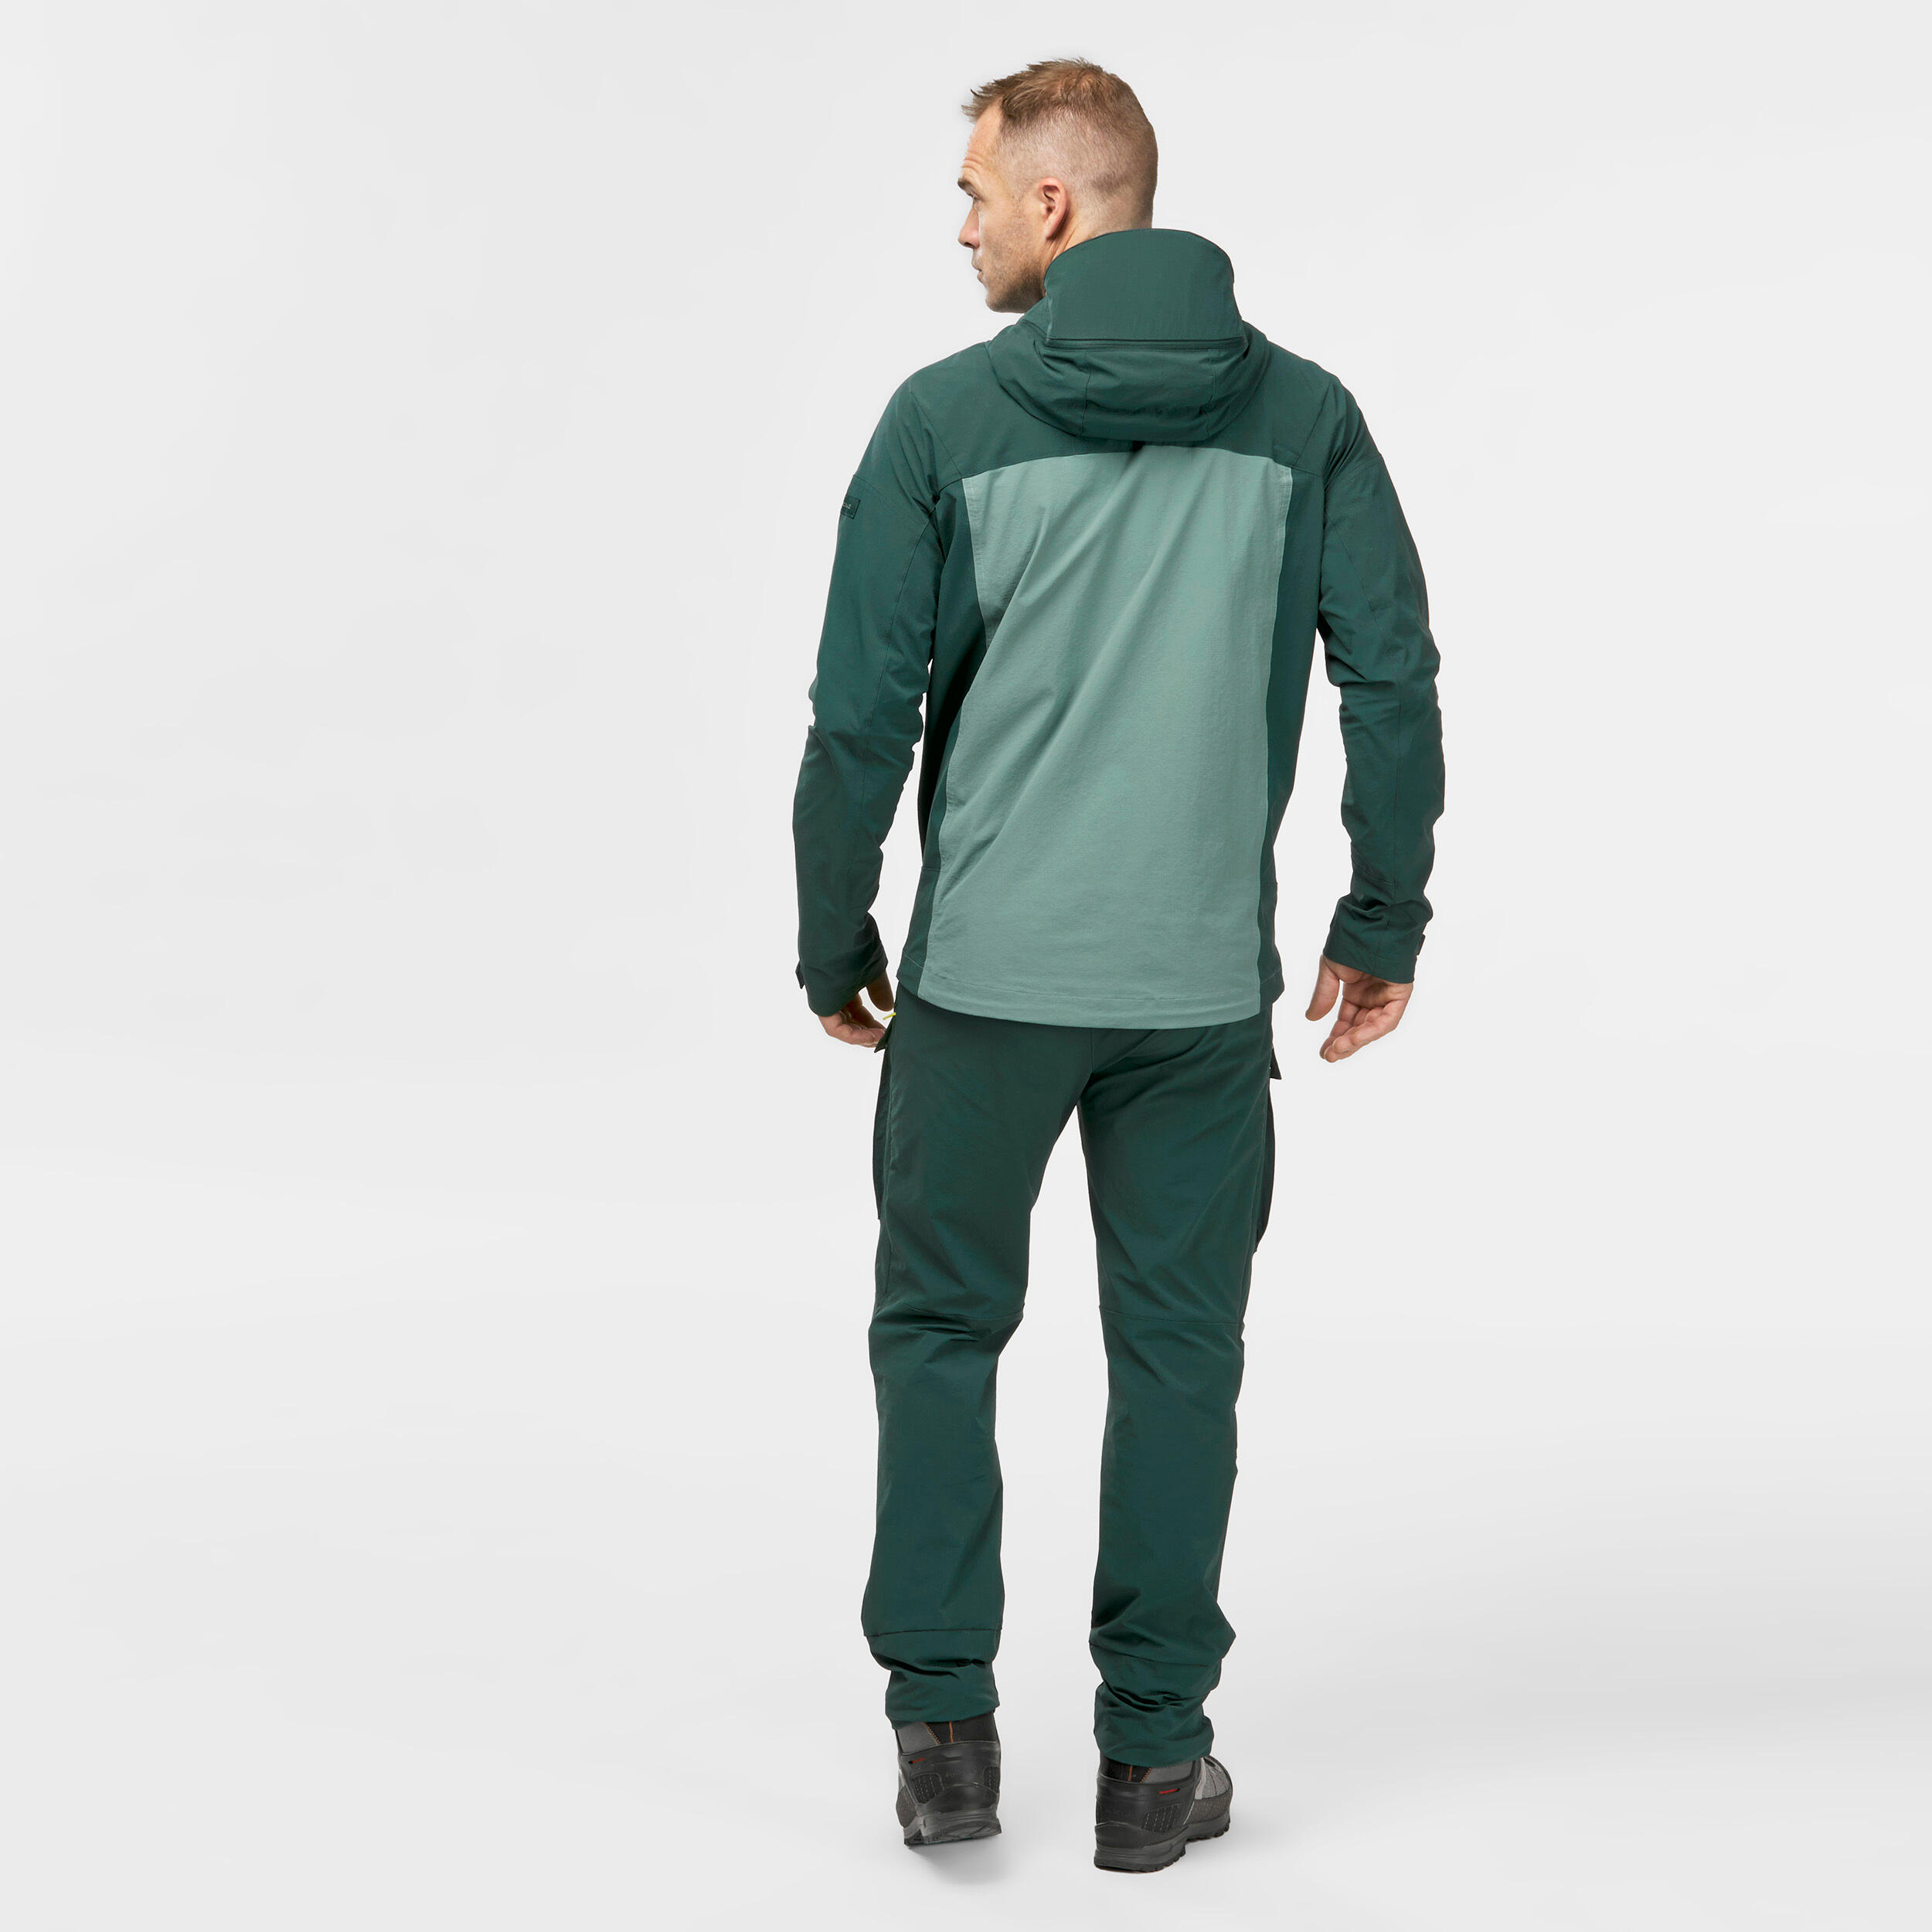 Mosquito Hiking Jacket - Tropic 900 Green - FORCLAZ